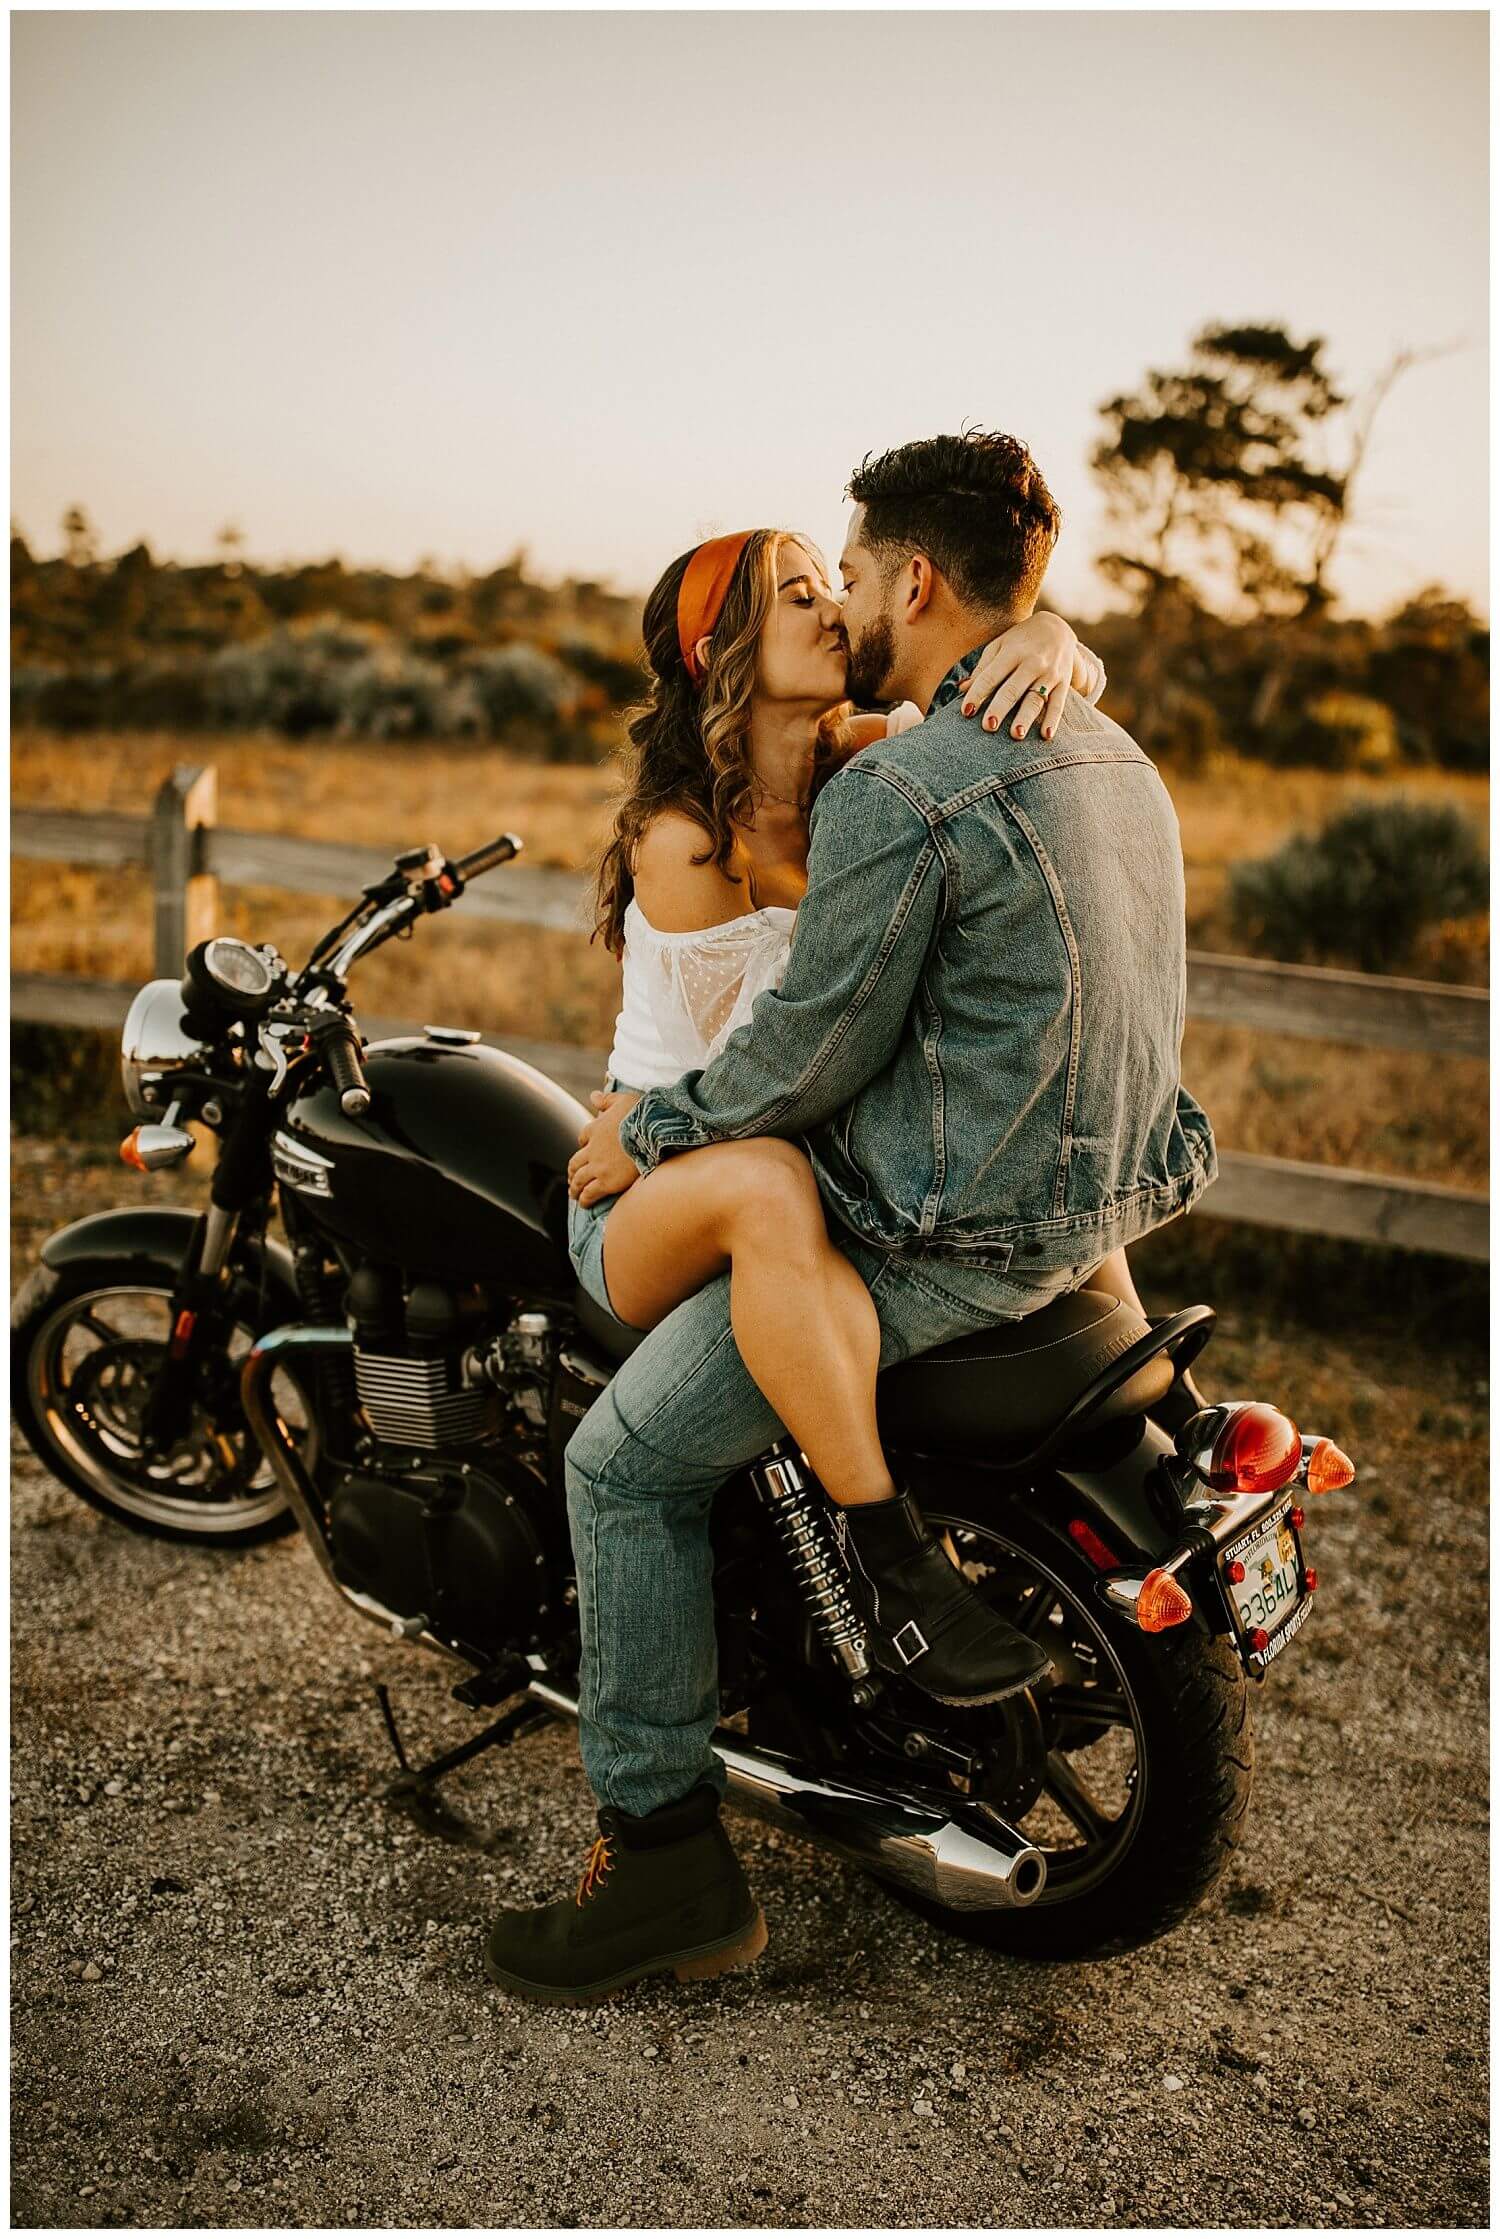 Edgy Motorcycle Engagement Photos - Meagan Puett